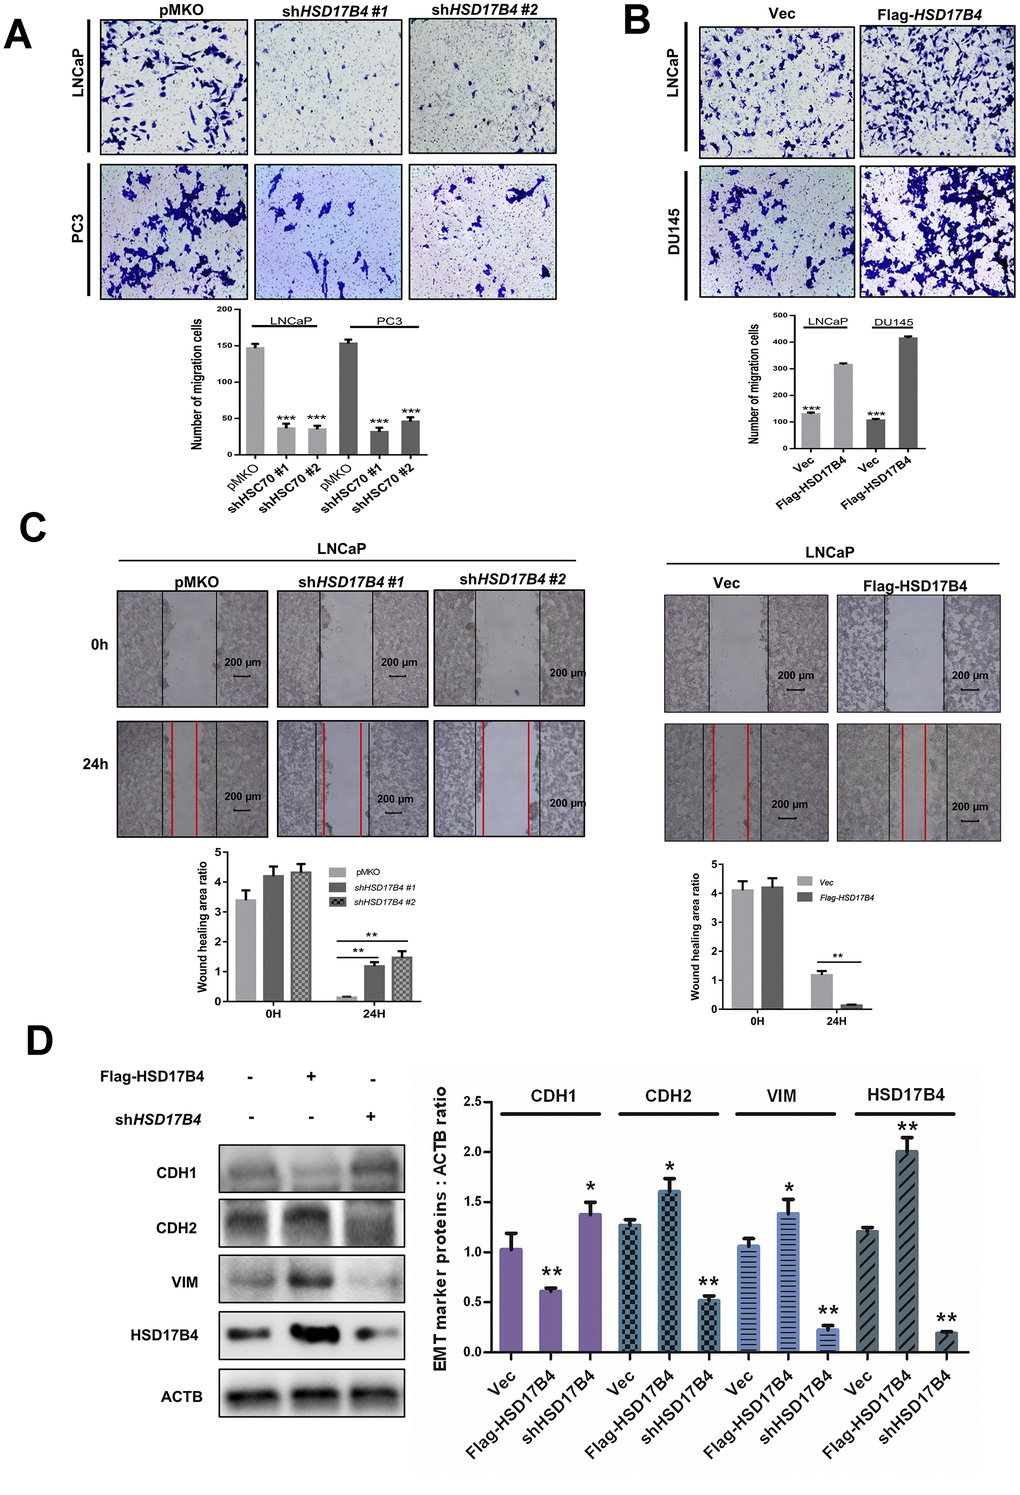 HSD17B4 promotes the migration of PCa cells. (A–B) Knockdown of HSD17B4 inhibits the migration of PCa cells, while HSD17B4 overexpression promotes cell migration. LNCaP, DU145 and PC3 stable cells were treated as indicated and analyzed by migration assays in 24-well chambers without Matrigel. Quantitative analysis of cell migration was performed by ImageJ. (C) Knockdown of HSD17B4 inhibits migration of PCa cells, while HSD17B4 overexpression promoted cell migration. LNCaP, DU145 and PC3 stable cells treated as indicated were analyzed by a wound-healing assay. Scale bars: 200 μm. Quantitative analysis of the wound healing area was performed by ImageJ. (D) Knockdown of HSD17B4 increases CDH1 but decreases CDH2 and VIM in LNCaP cells, while HSD17B4 overexpression induces the inverse results (left panel). Protein levels of CDH1, CDH2, VIM and HSD17B4 were normalized against ACTB, *denotes P**denotes P 